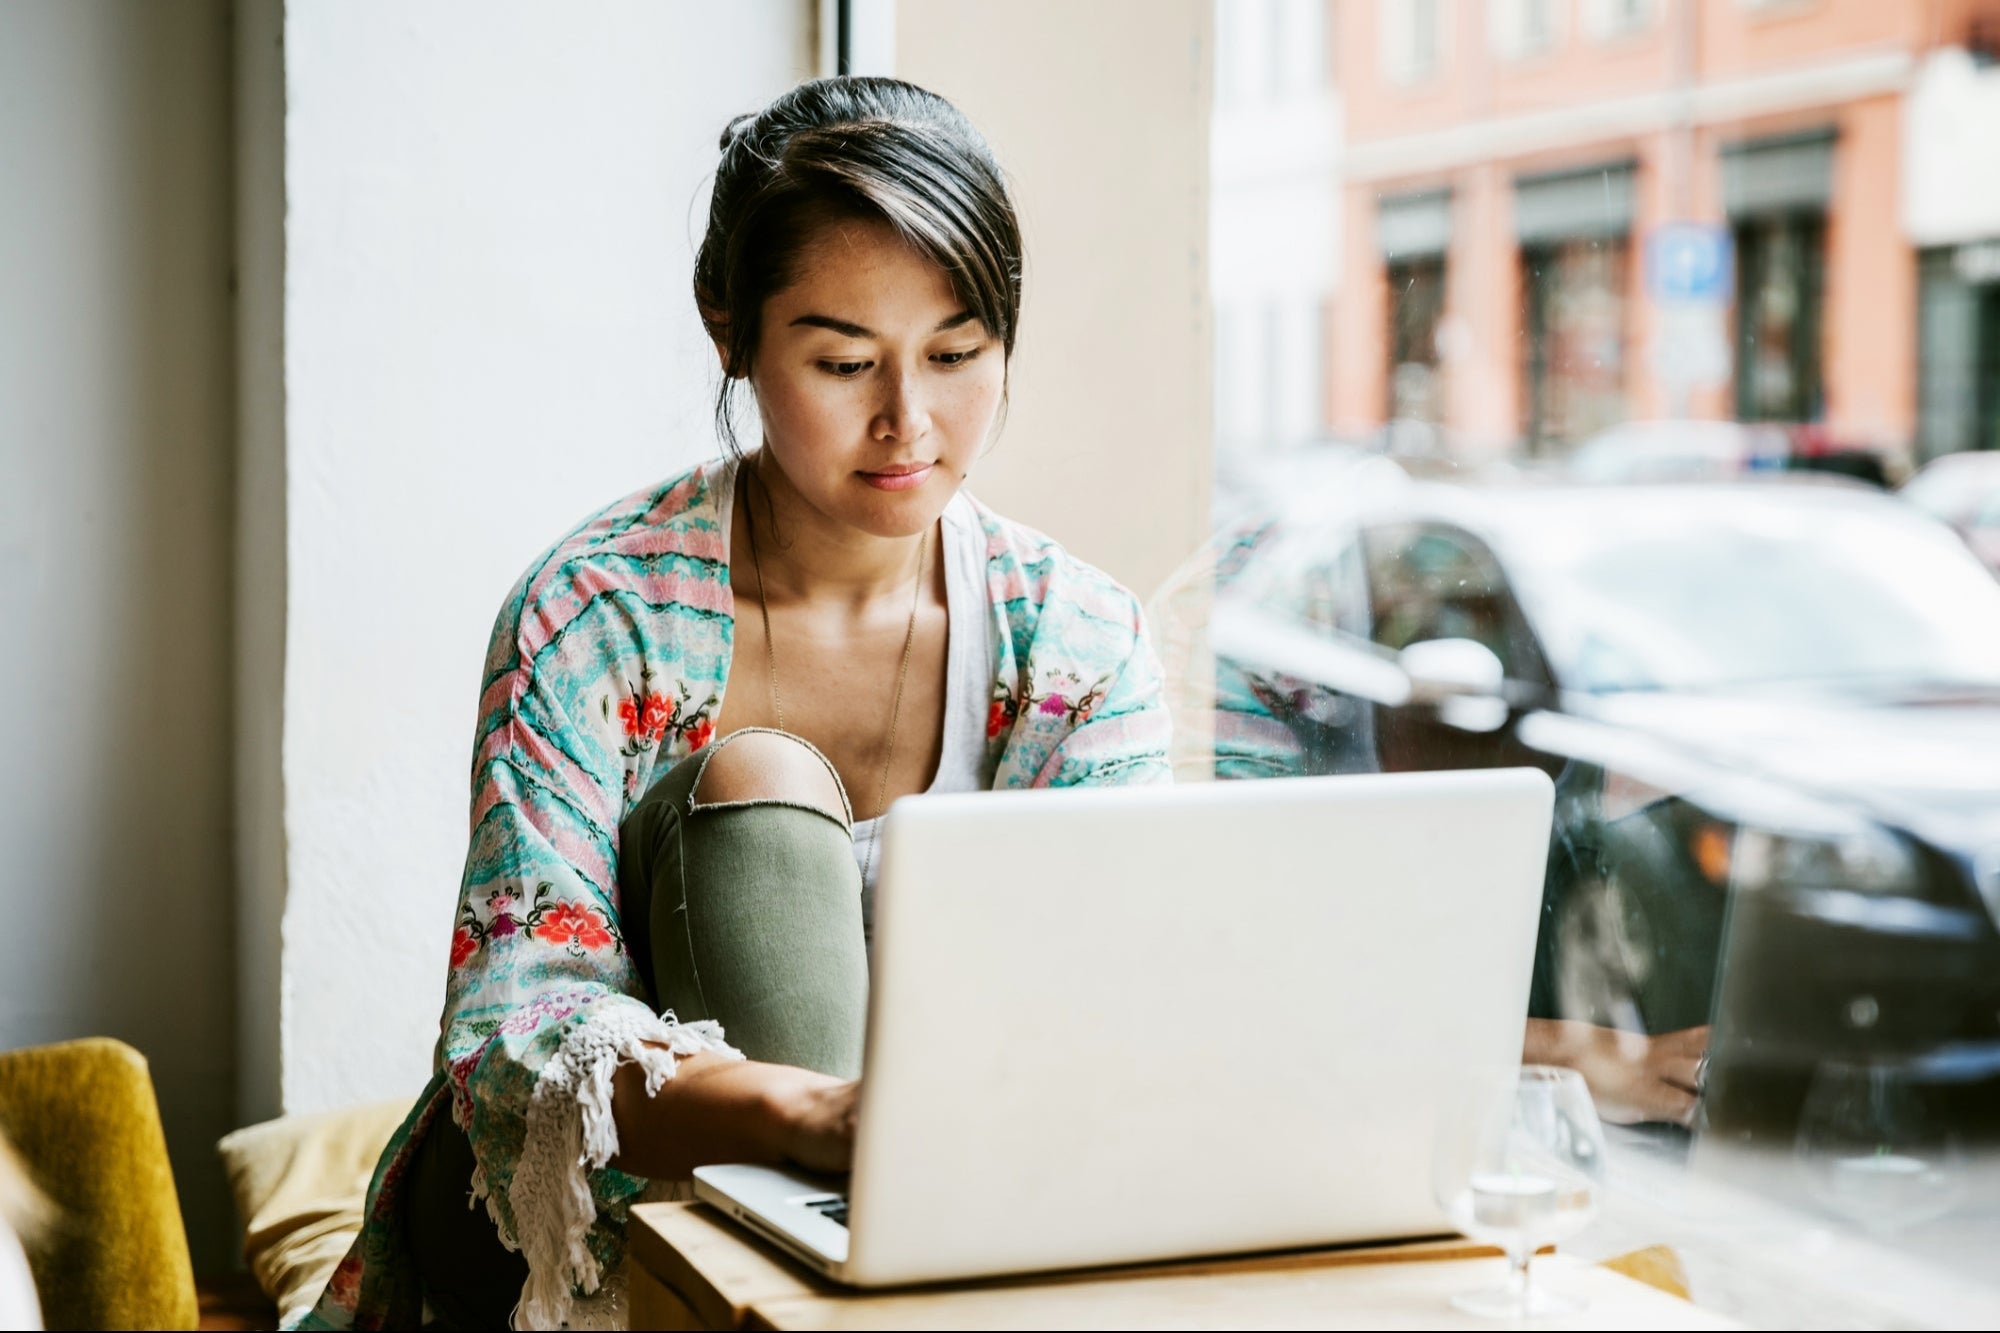 Free On-Demand Webinar: How to Find the Right Idea for Your Side Hustle